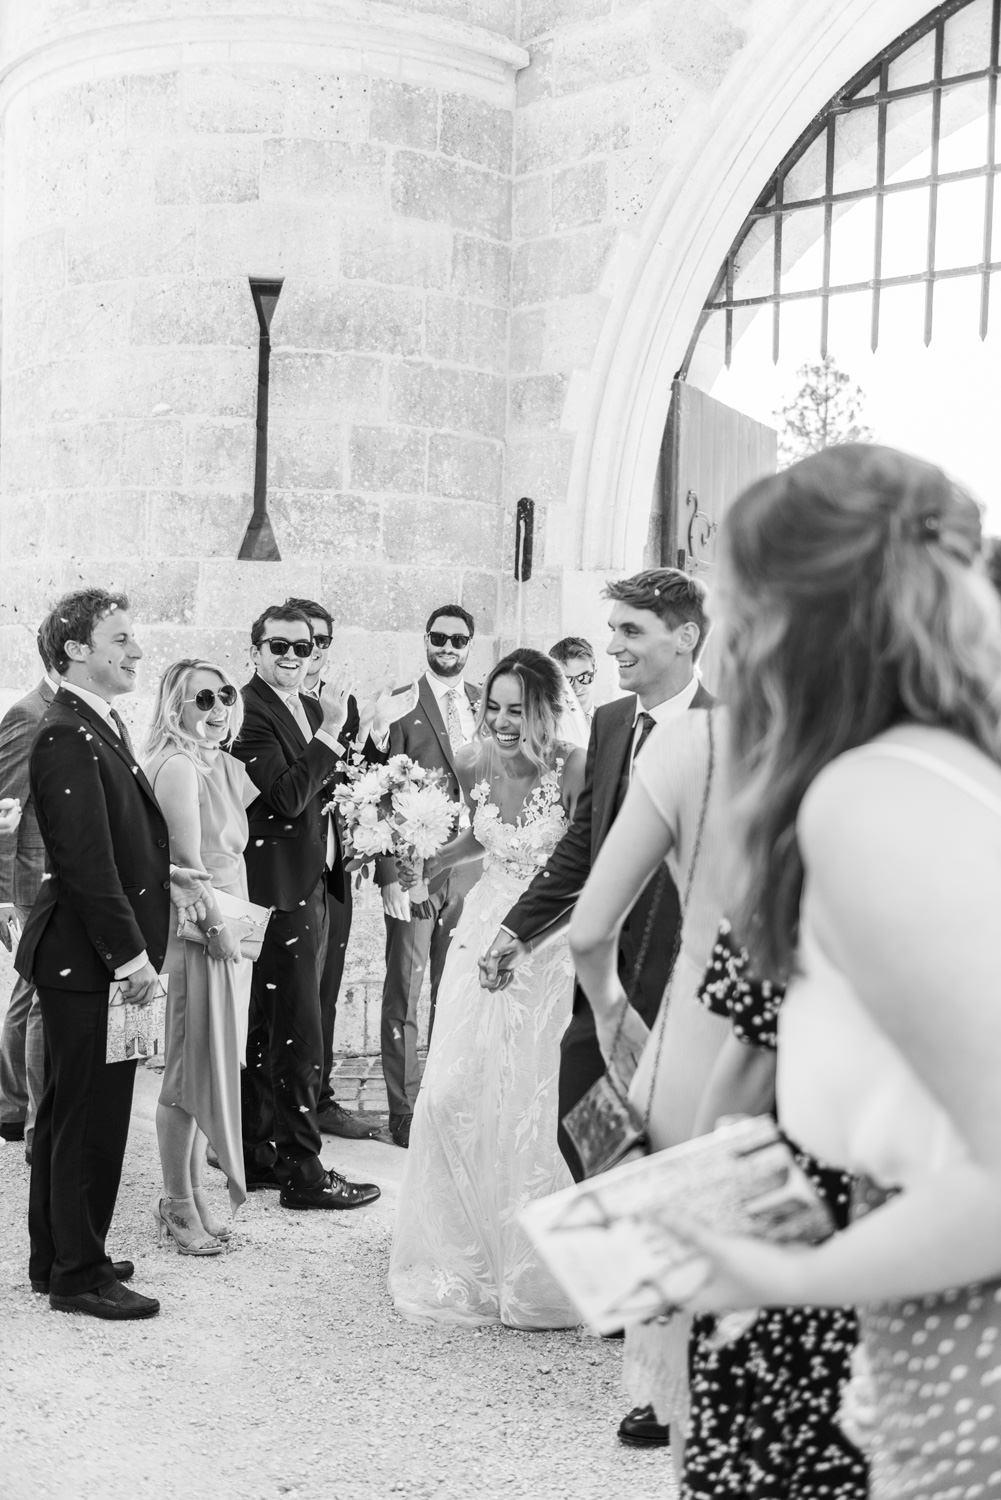 Black and white wedding photography in France